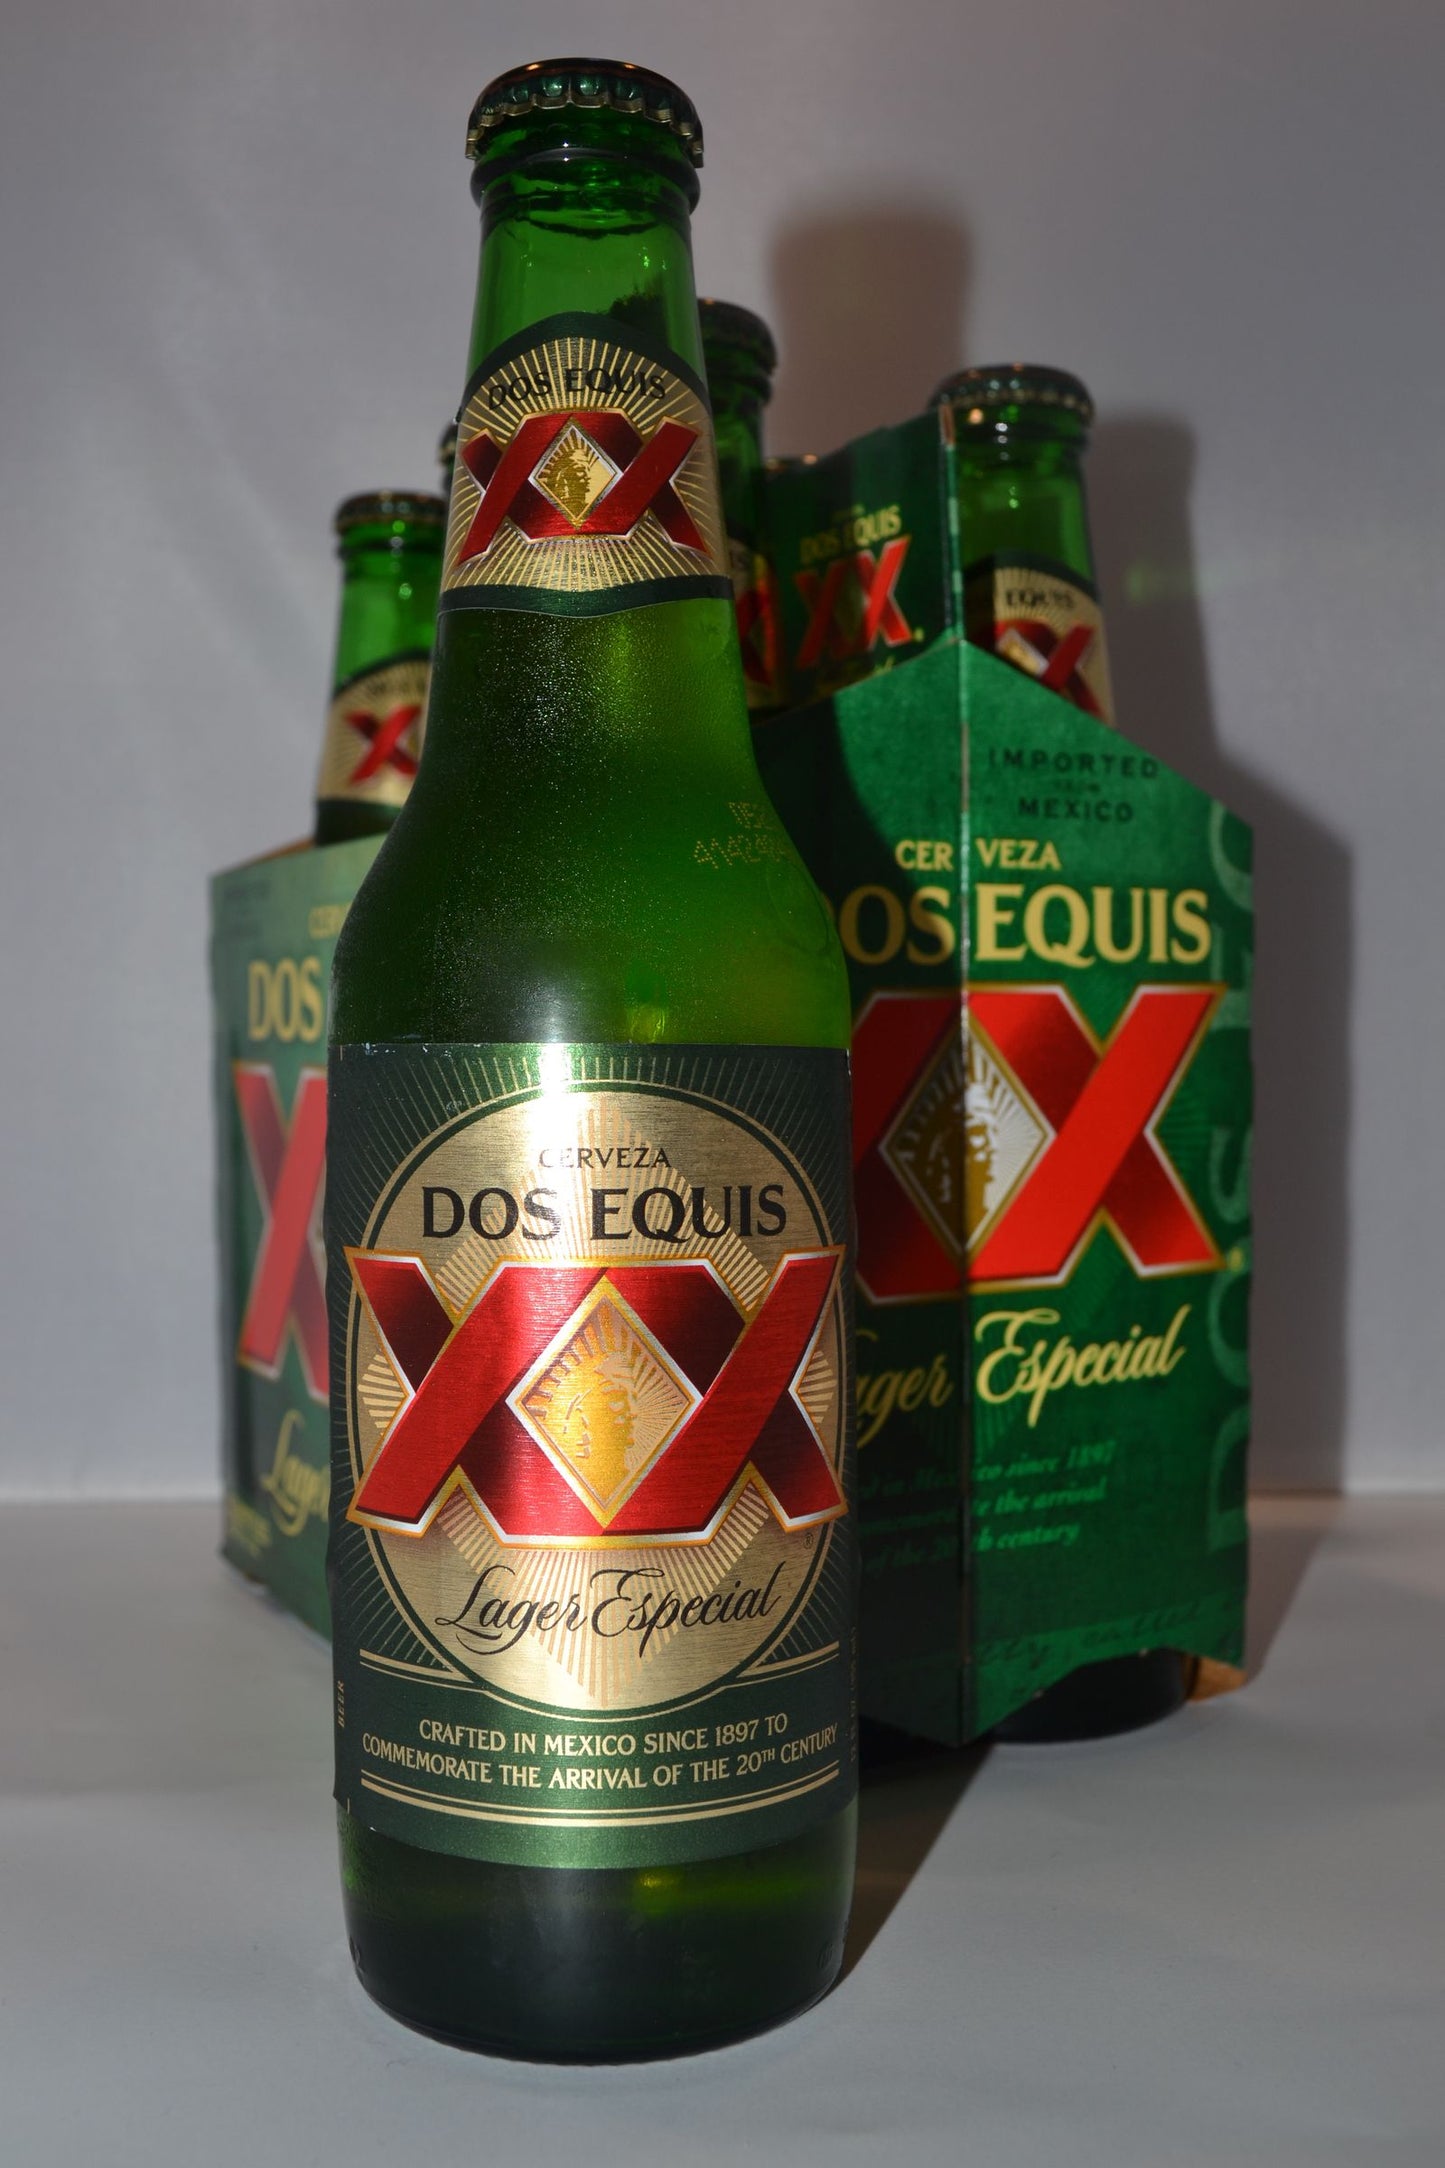 DOS EQUIS LAGER EXPECIAL 6X12 BOTTLE